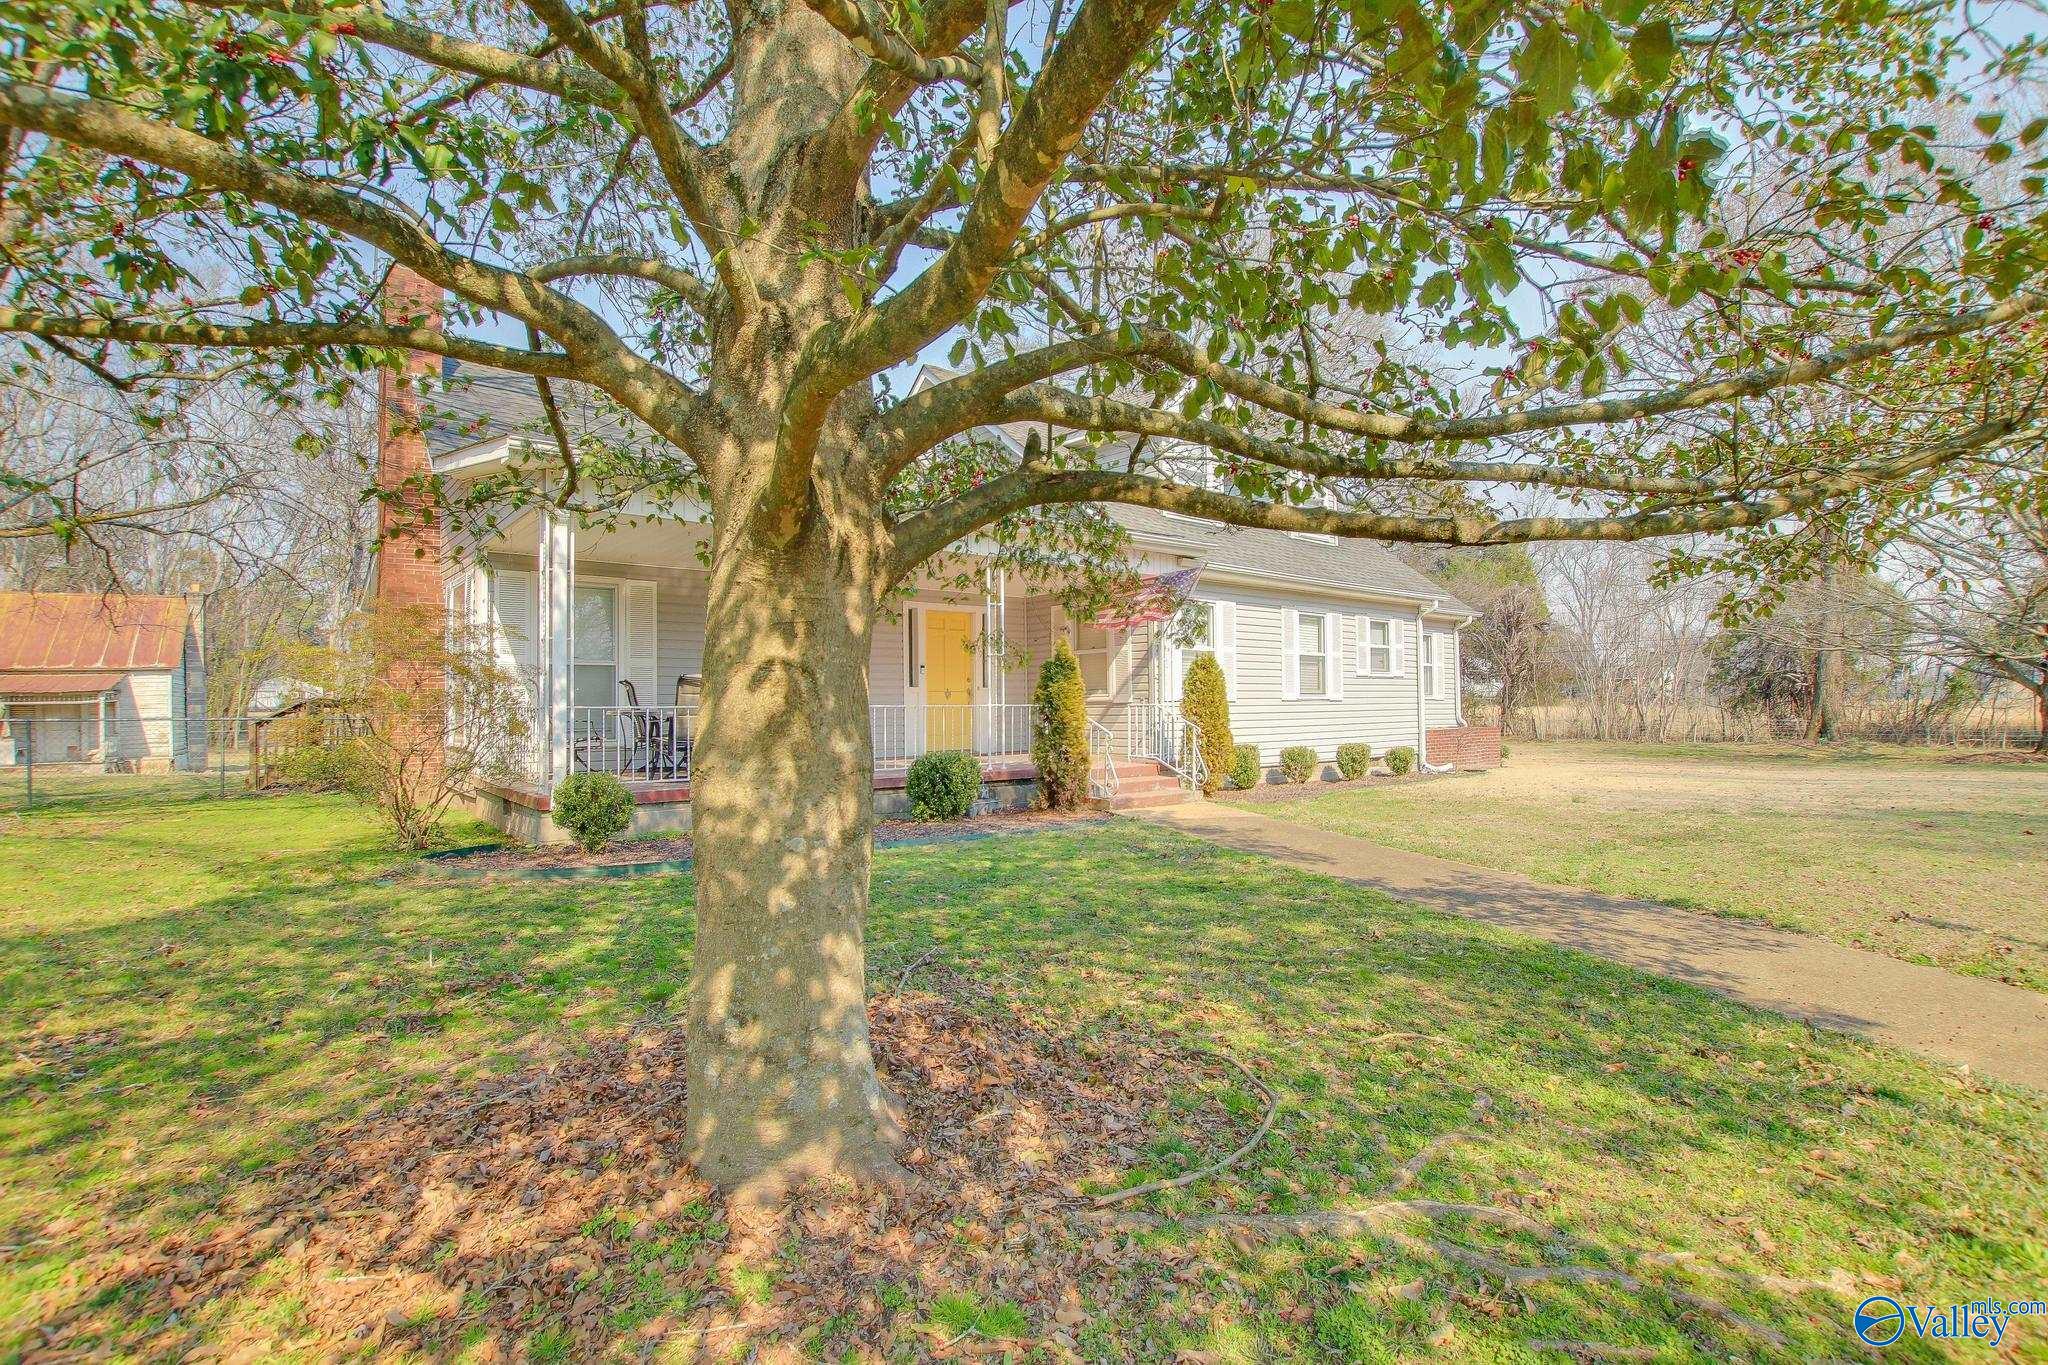 Property: 749 Tennessee Street,Courtland, AL